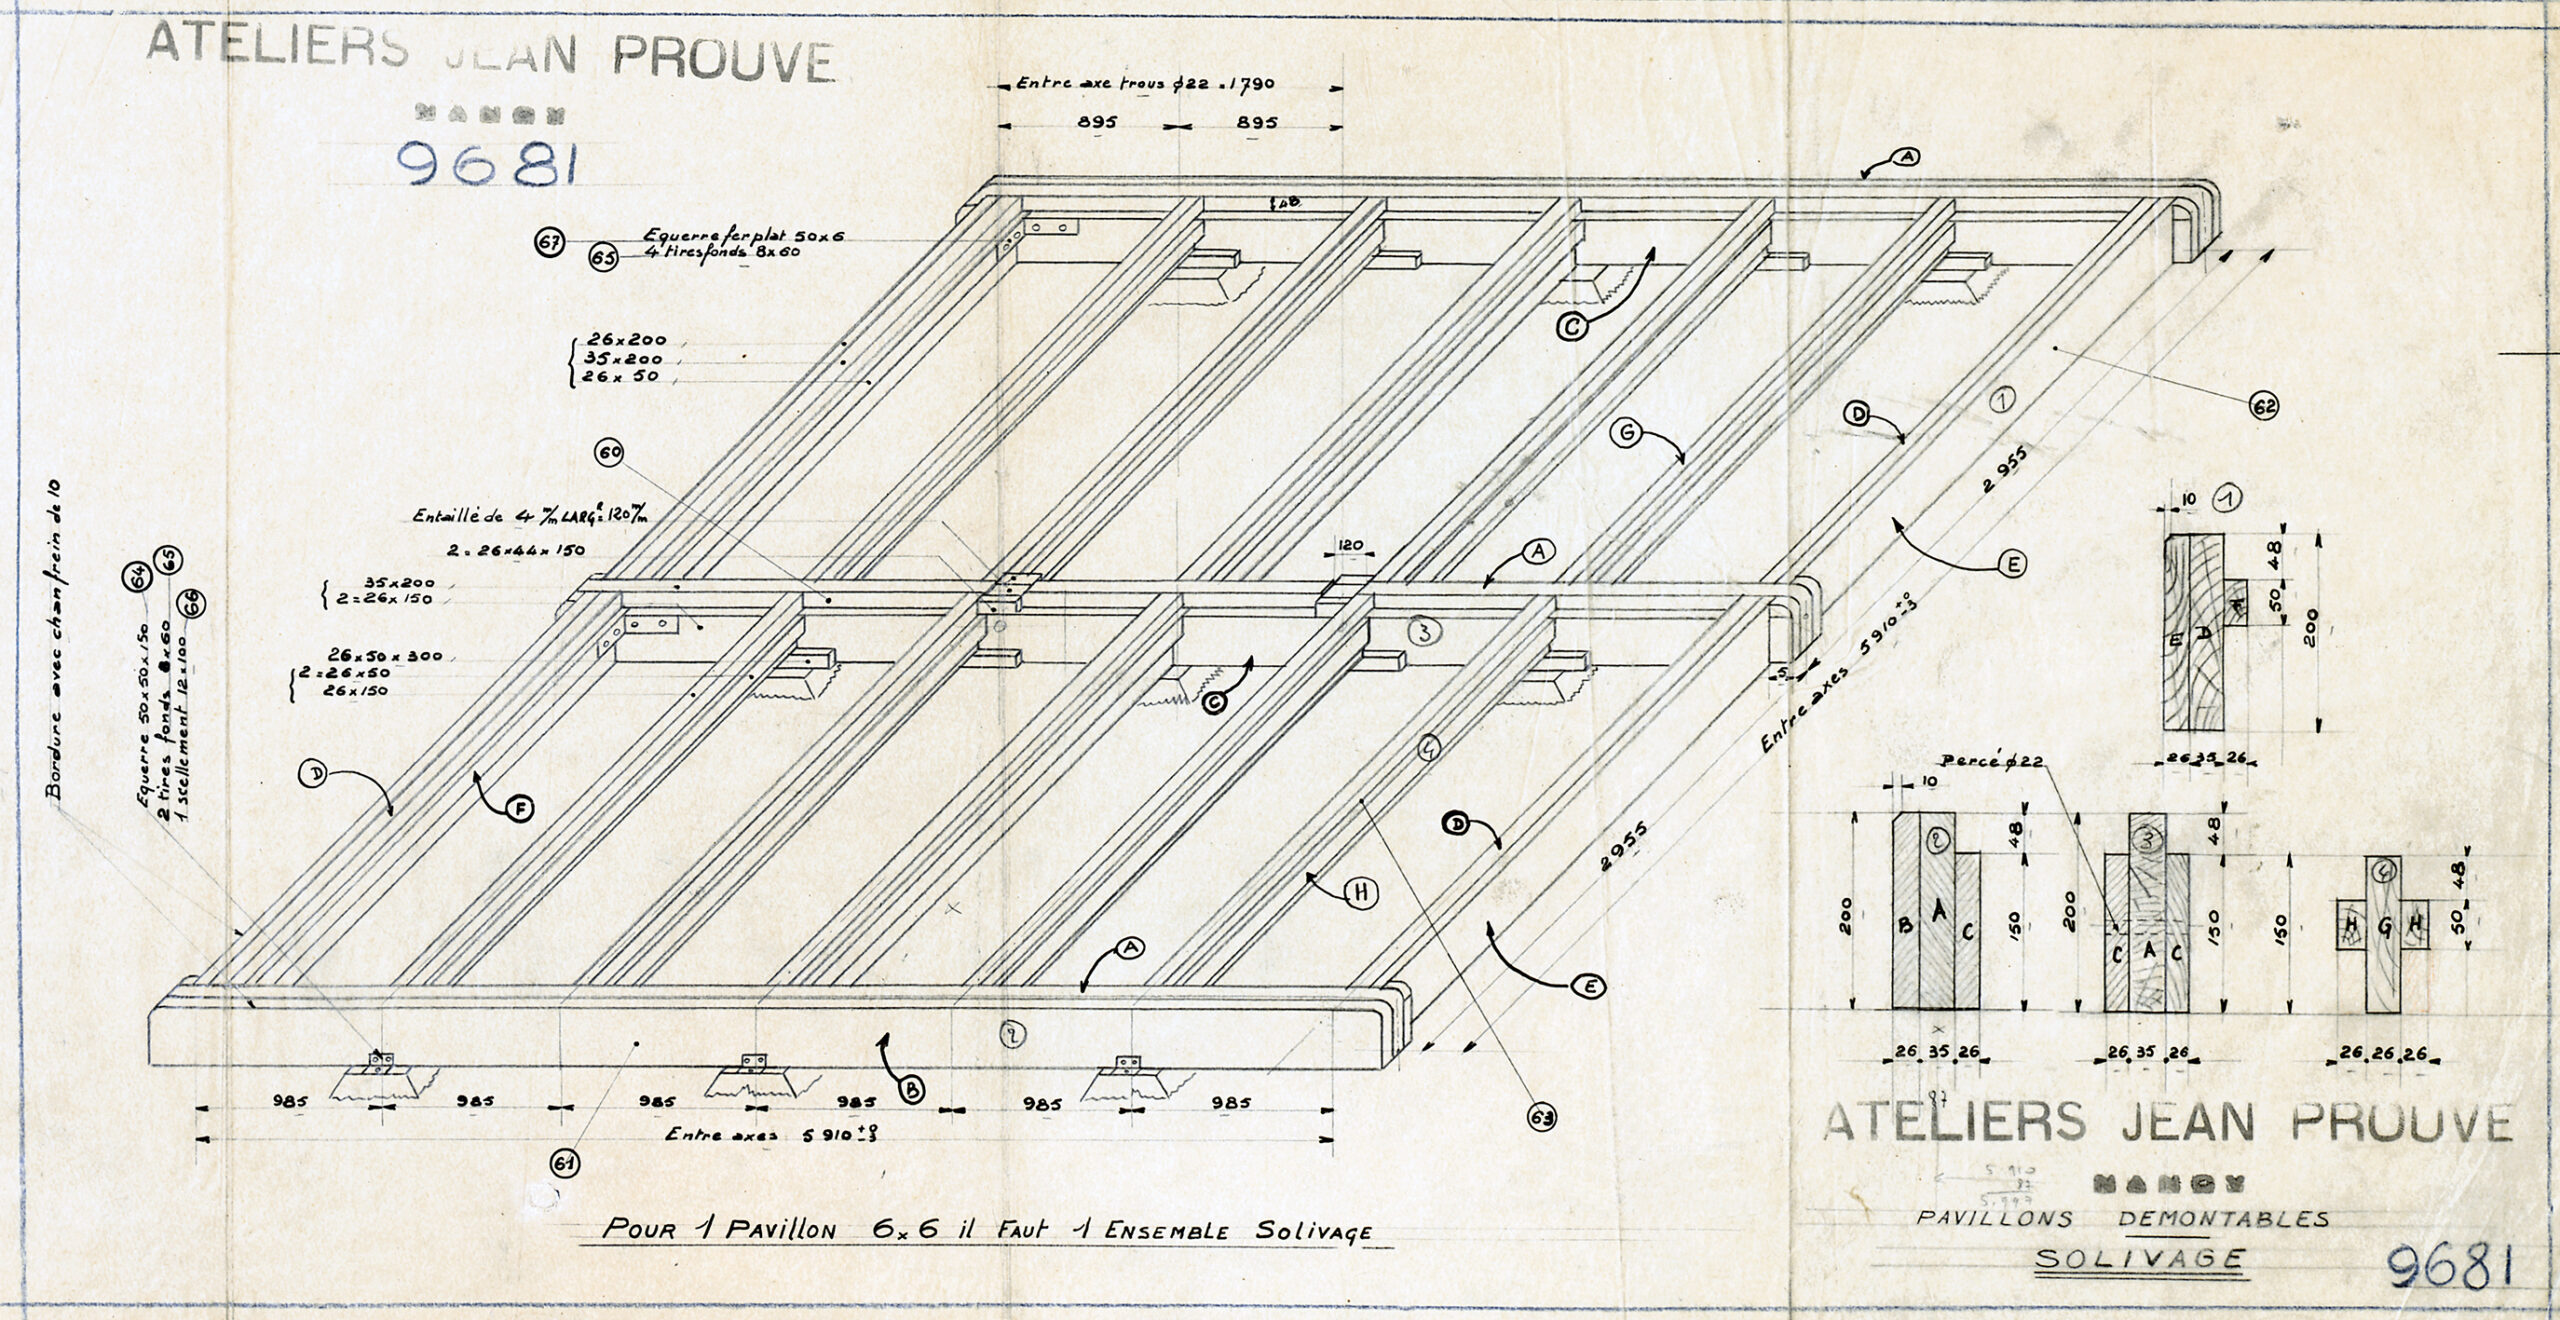 Ateliers Jean Prouvé. “Demountable pavilions, joists”, drawing no. 9681, 10 May 1945.